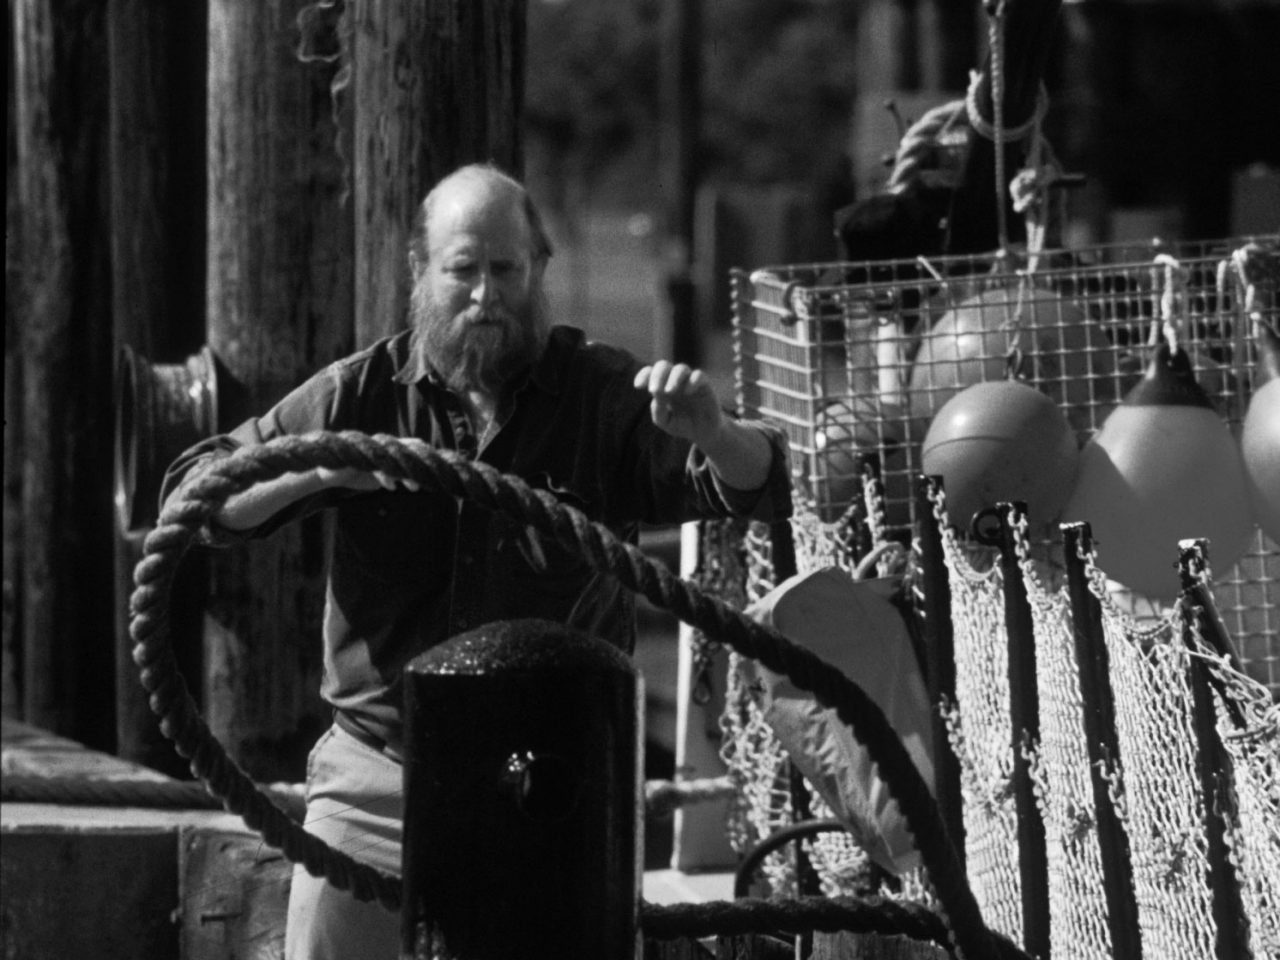 1950s-era photo of fisherman securing boat to dock